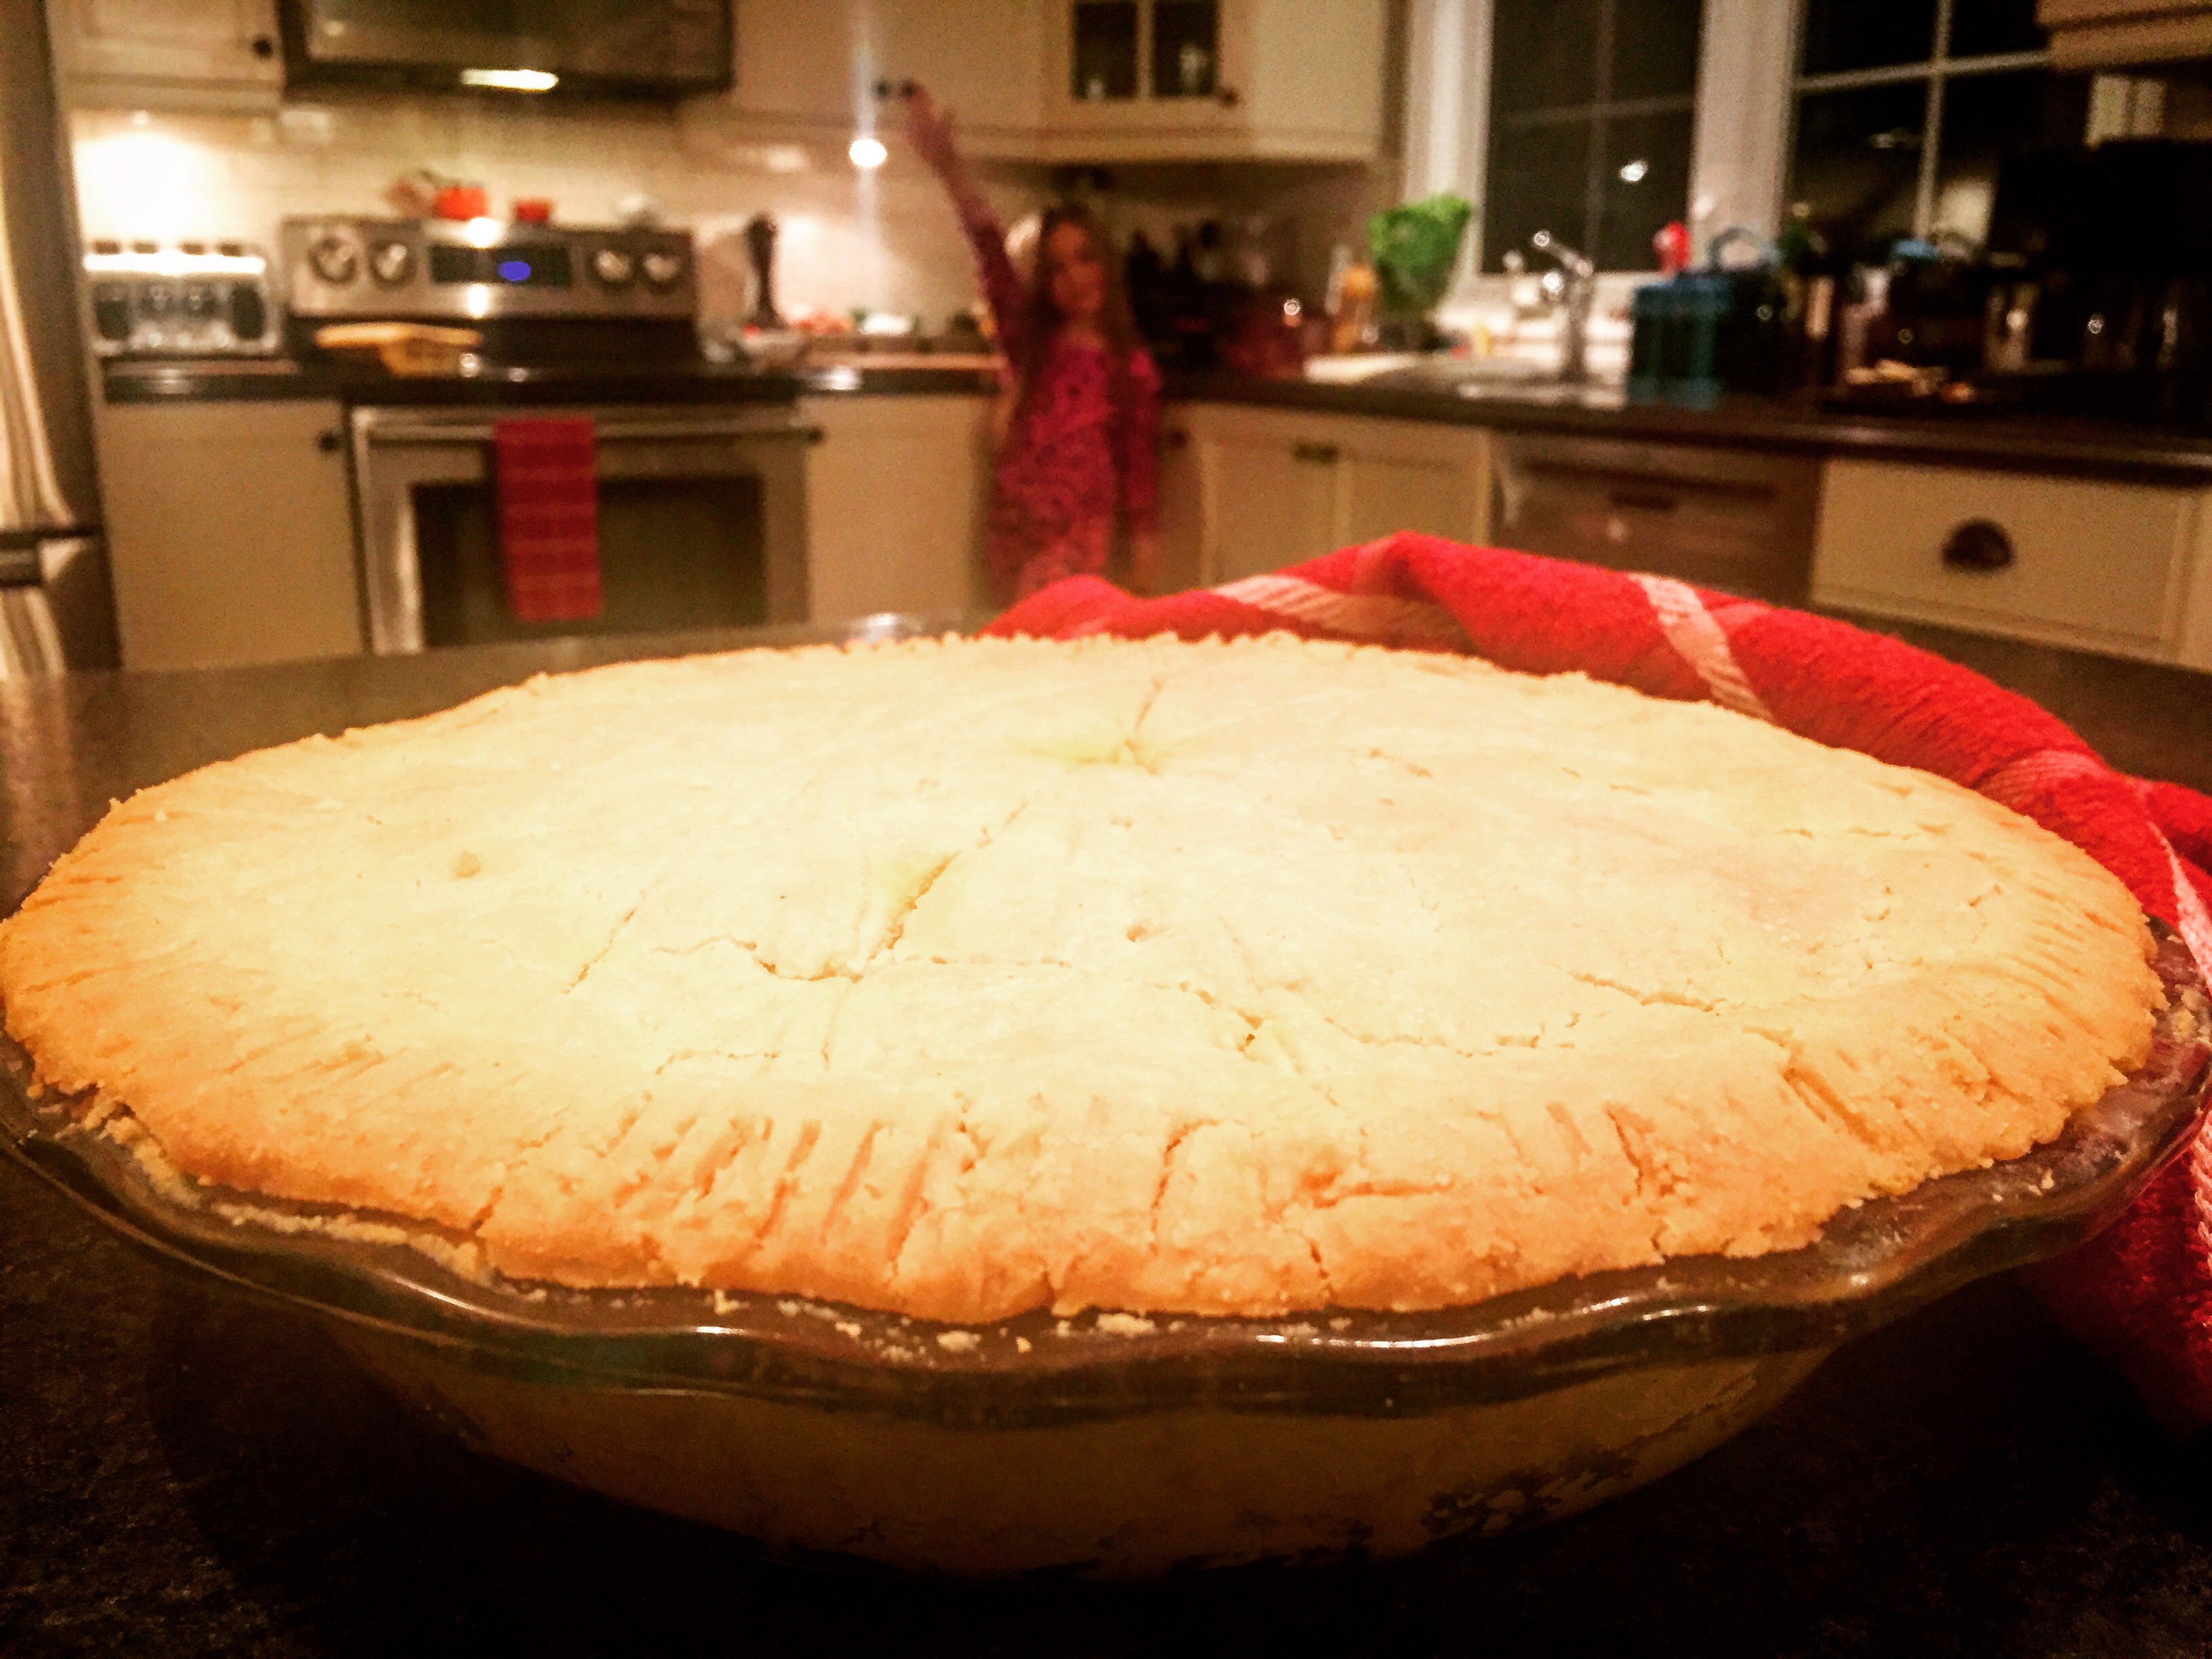 A delicious gluten free French-Canadian tourtiere with all the trimmings for a perfect Christmas feast